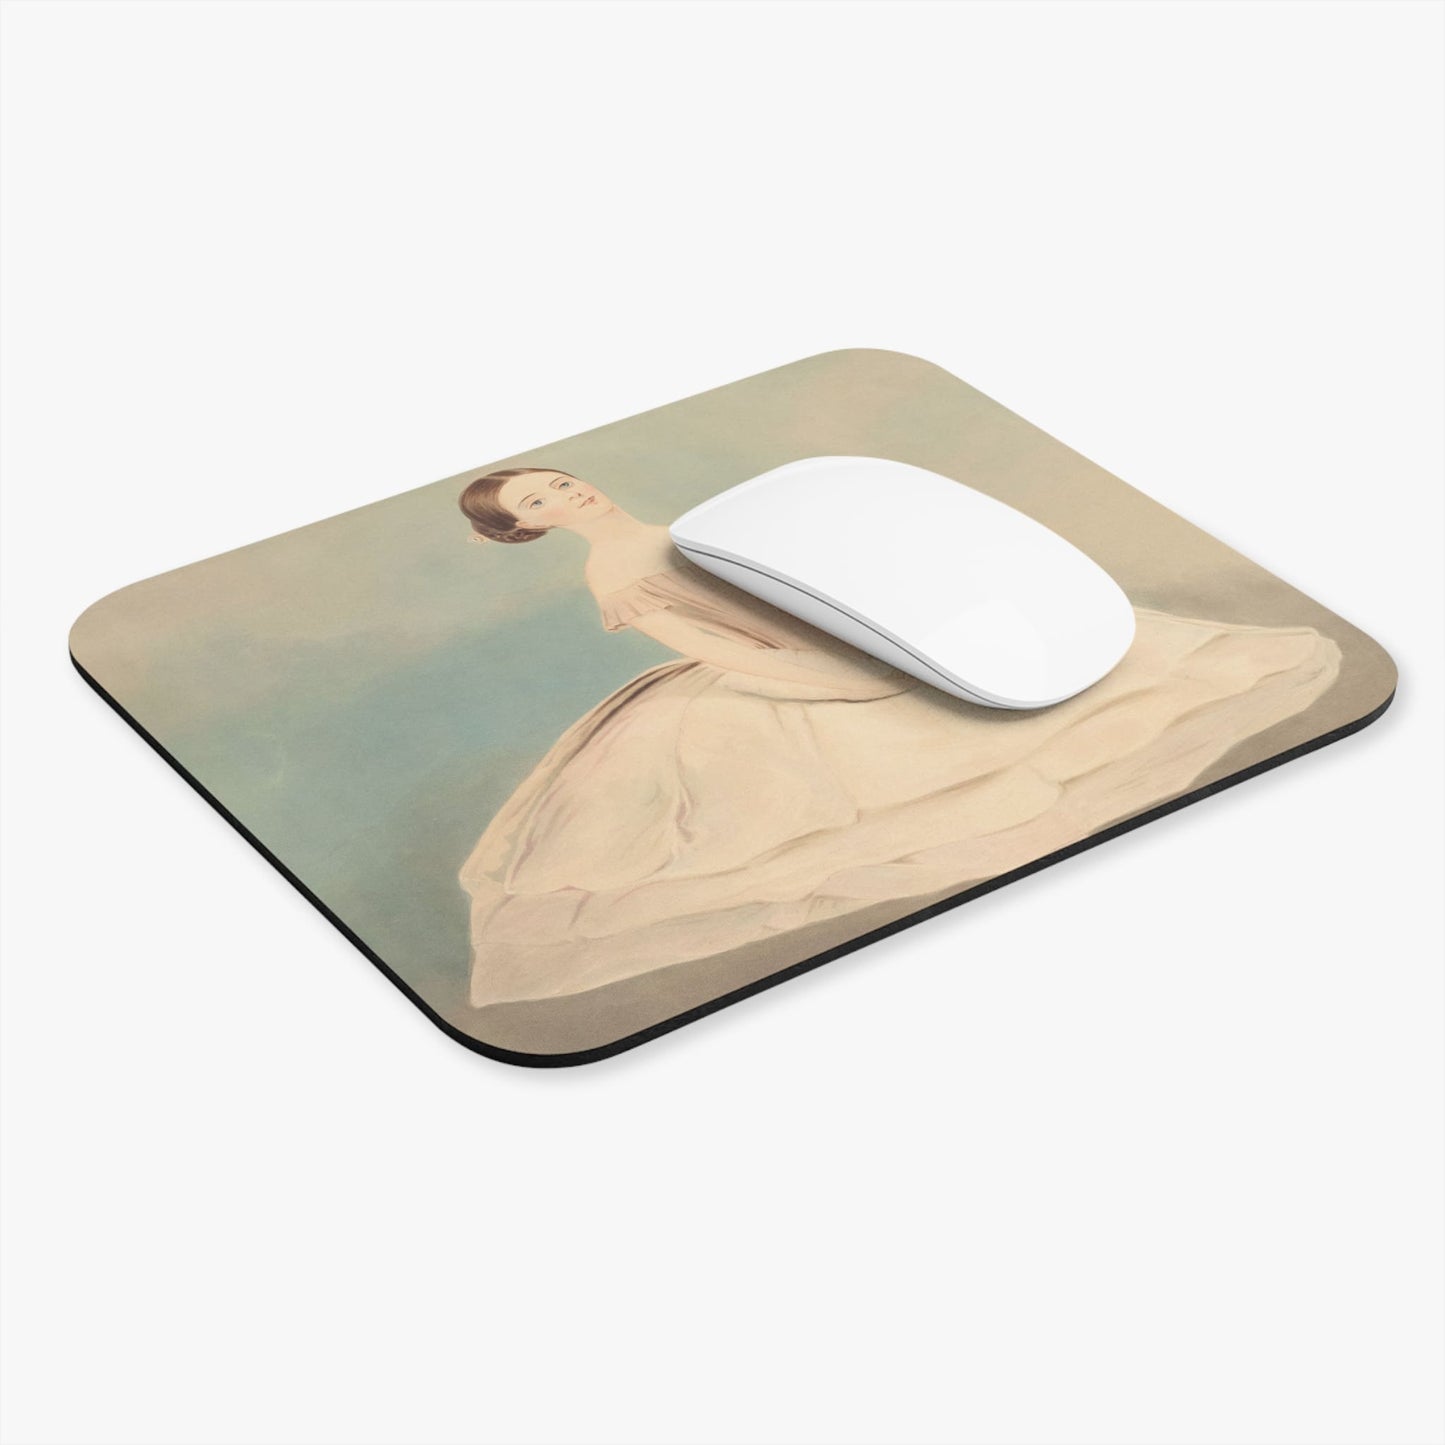 Minimalist Ballet Computer Desk Mouse Pad With White Mouse